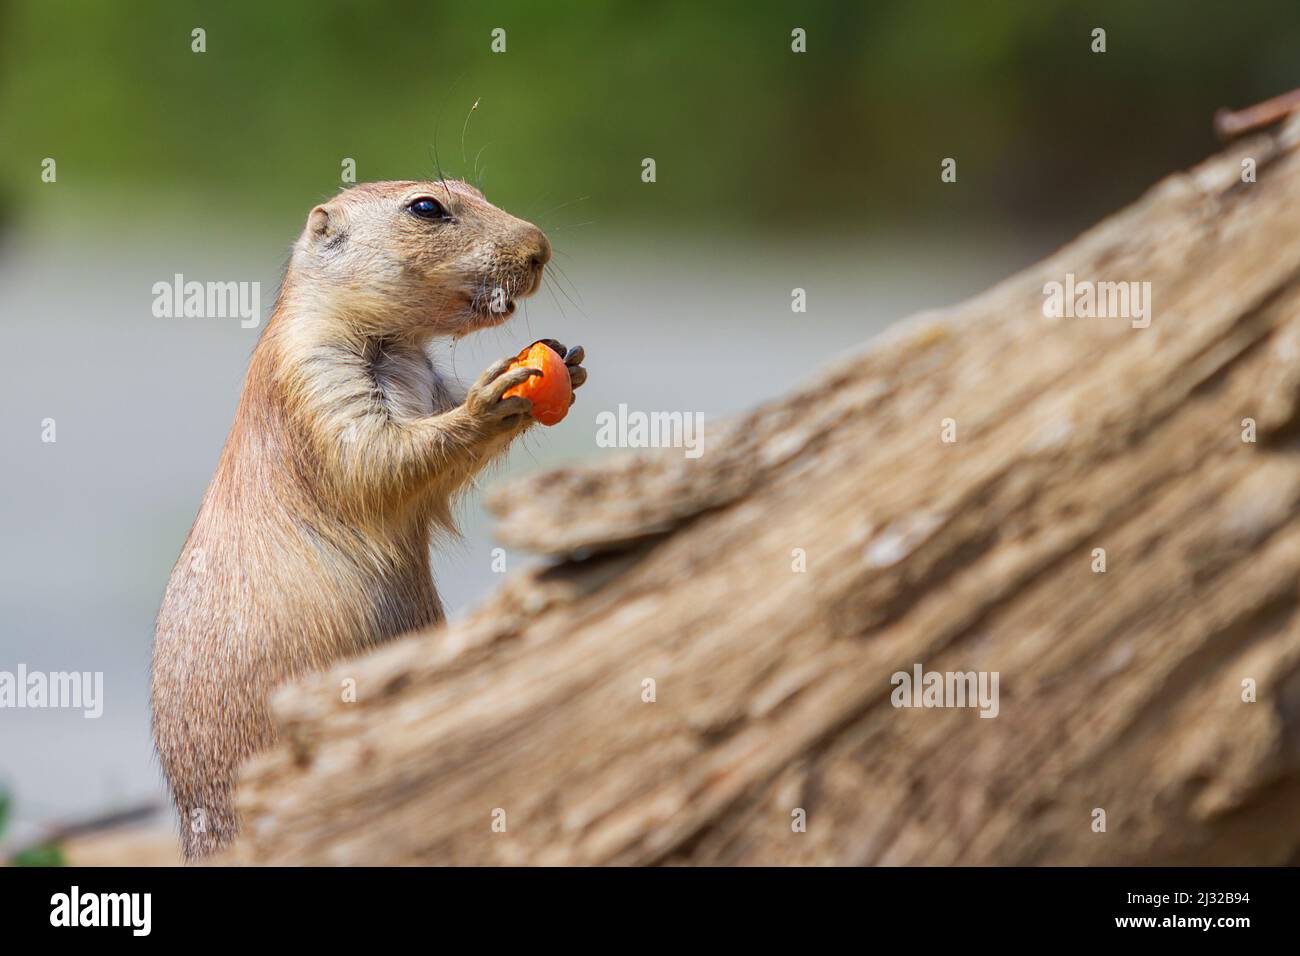 Ground squirrel - Spermophilus citellus stands in a meadow and has carrots in its paws Stock Photo